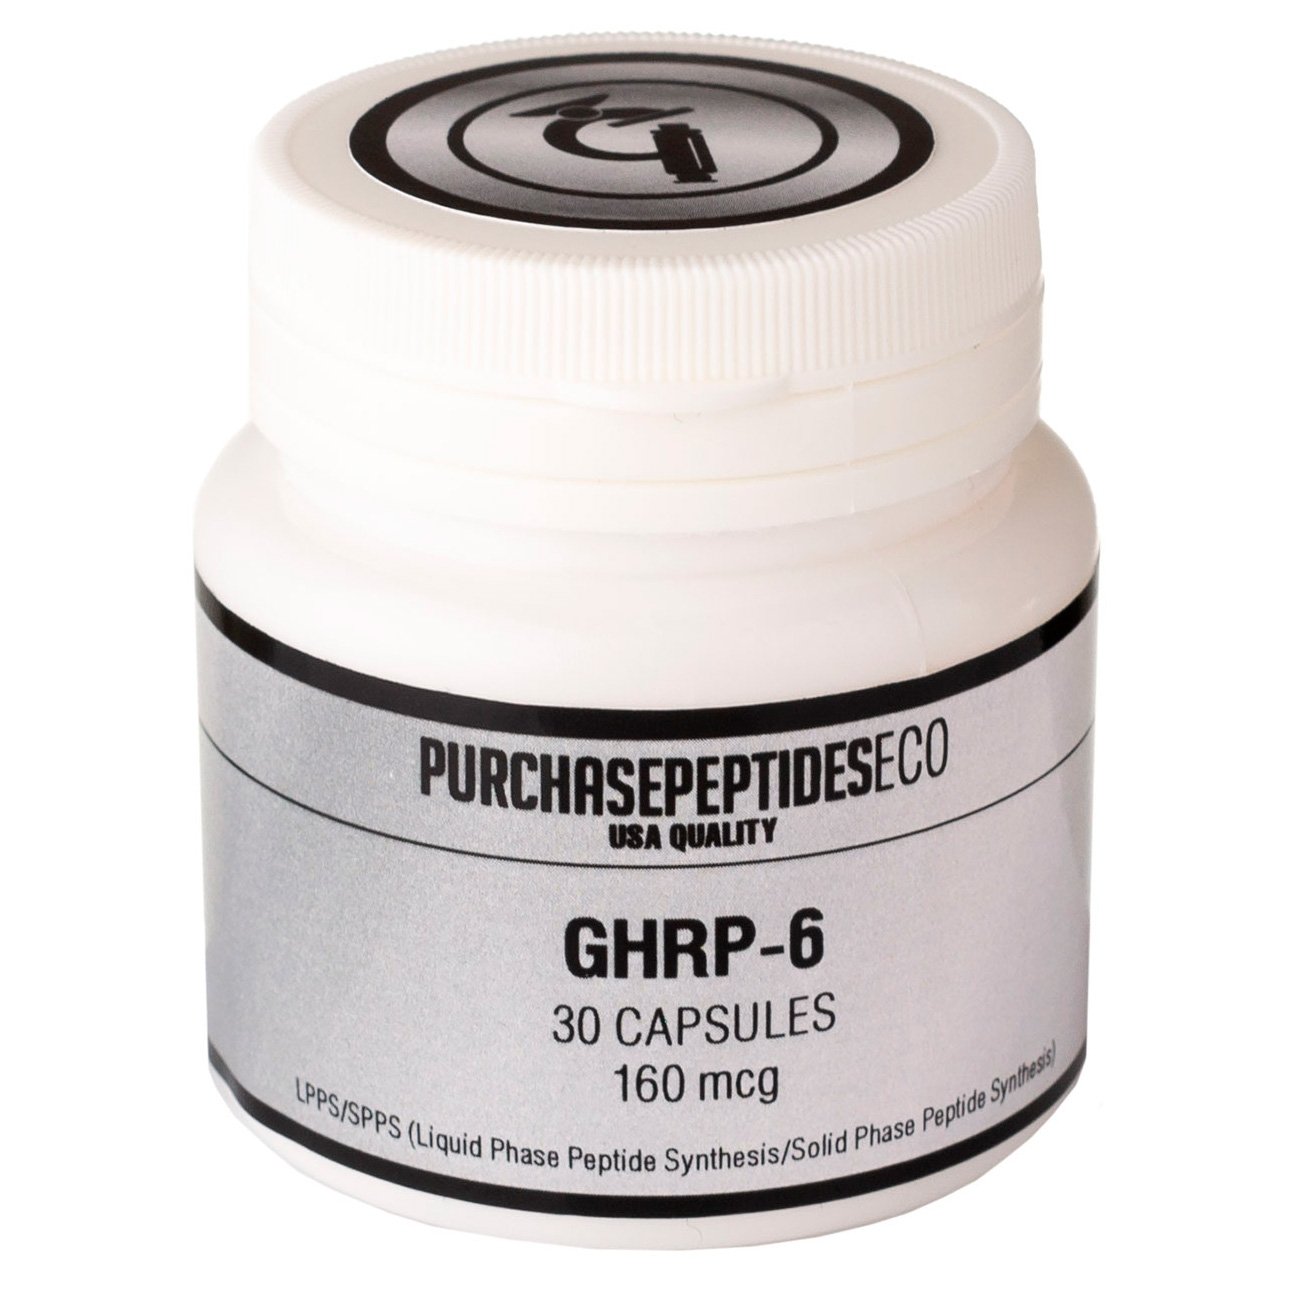 GHRP-6 капсулы,  ml, PurchasepeptidesEco. Peptides. 